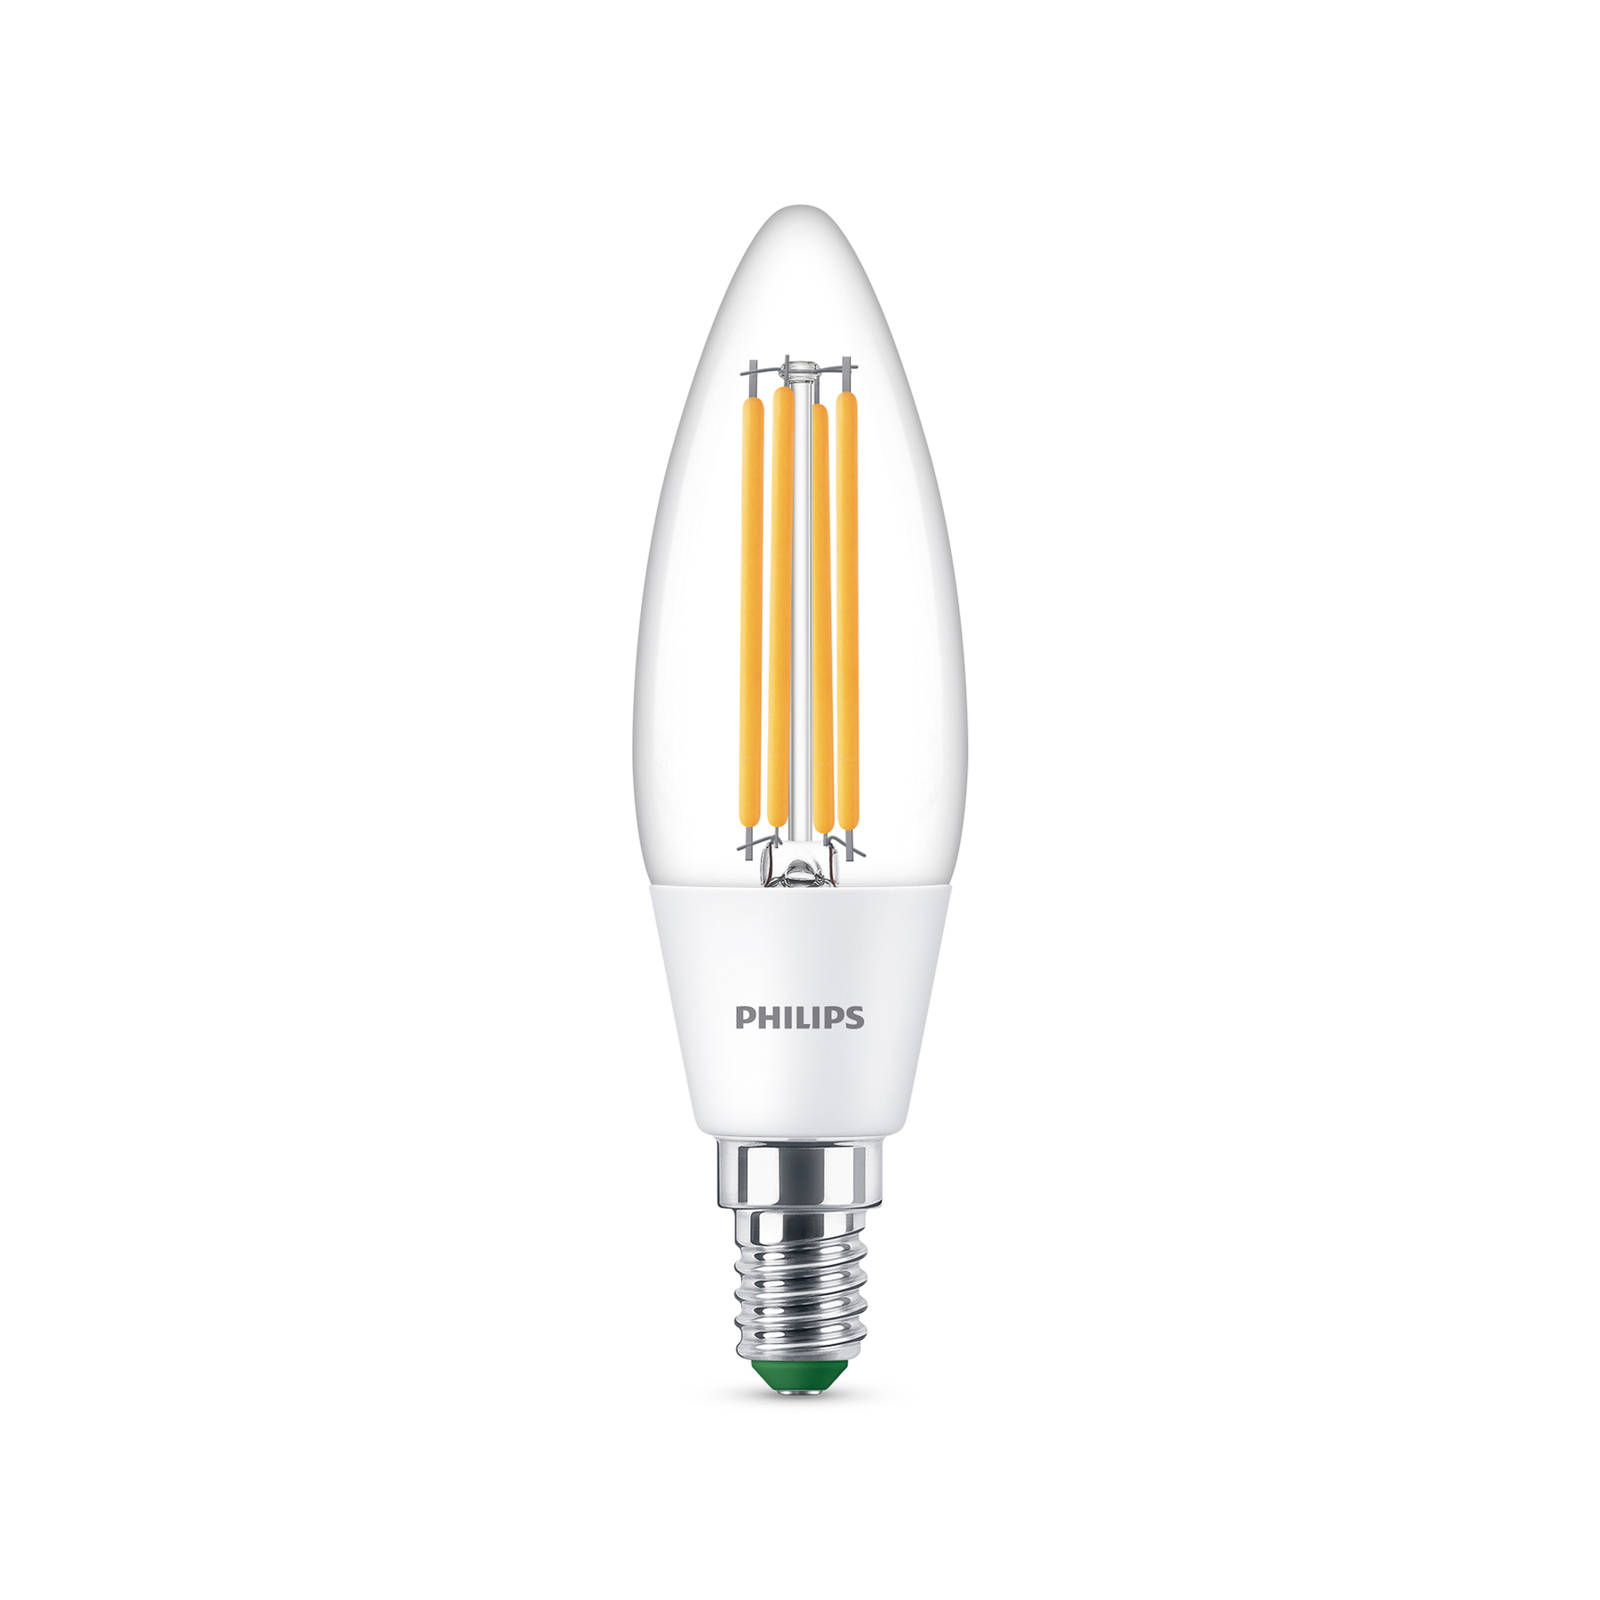 Philips bougie LED E14 2,3 W 485 lm claire 3 000 K